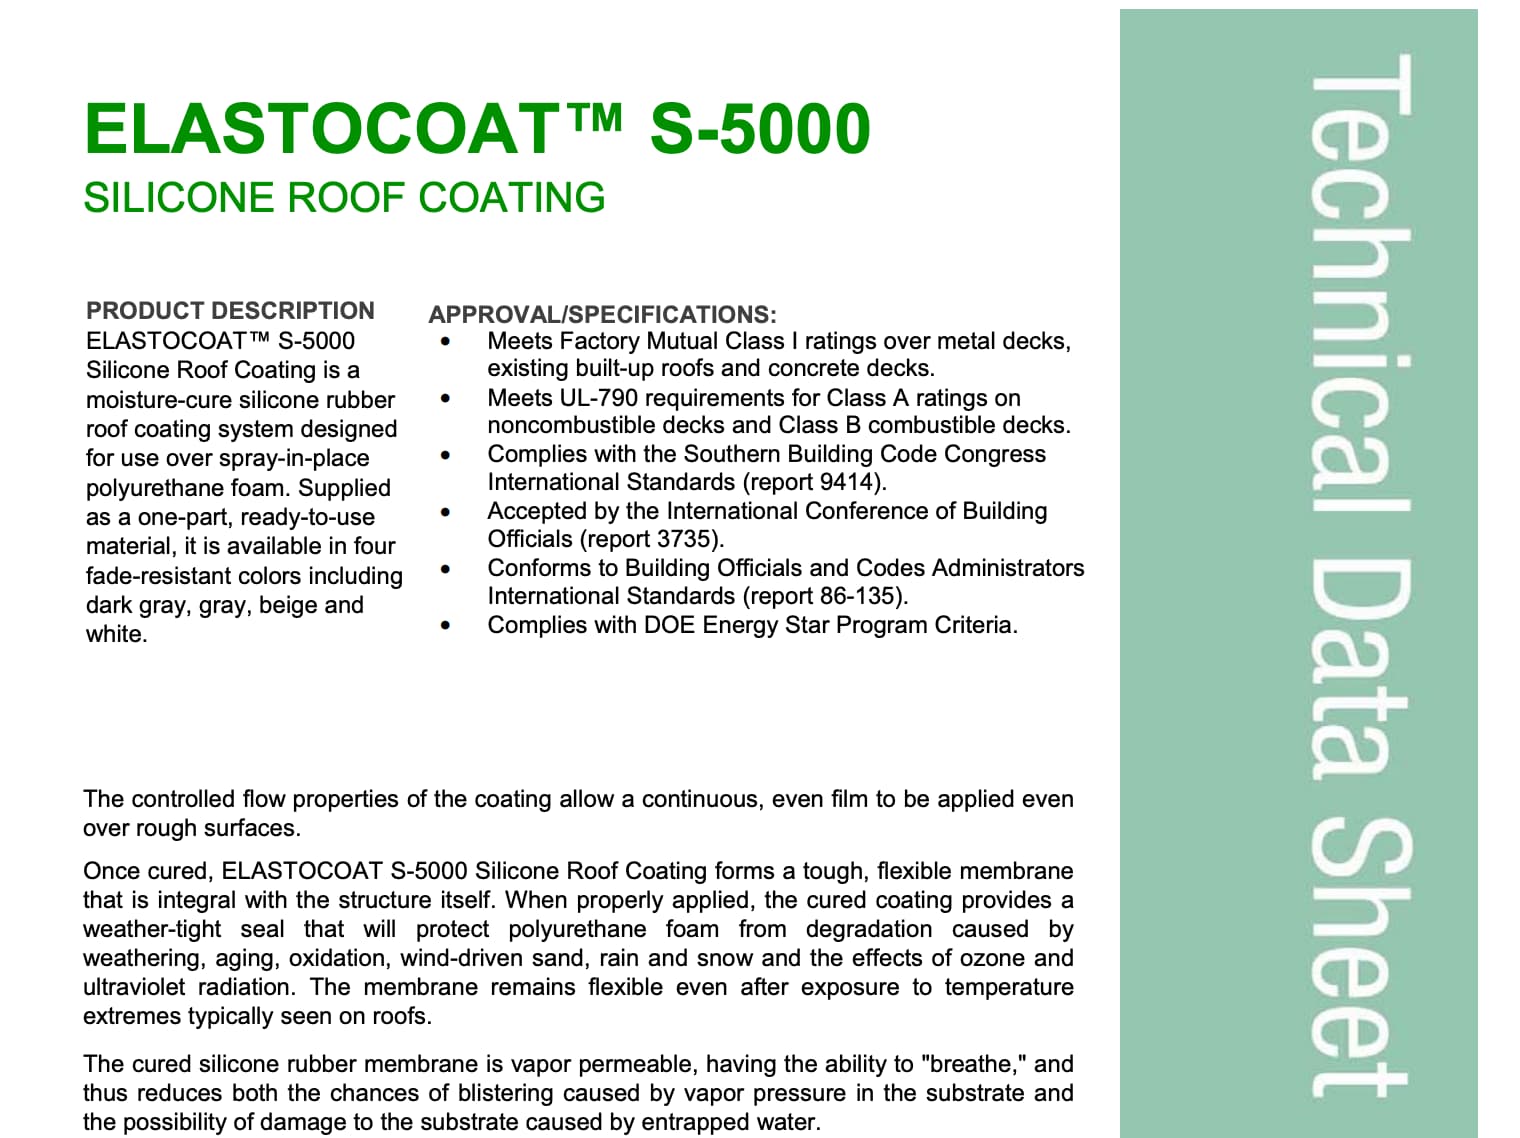 Base ELastocoat S 5000 technical information cover photo